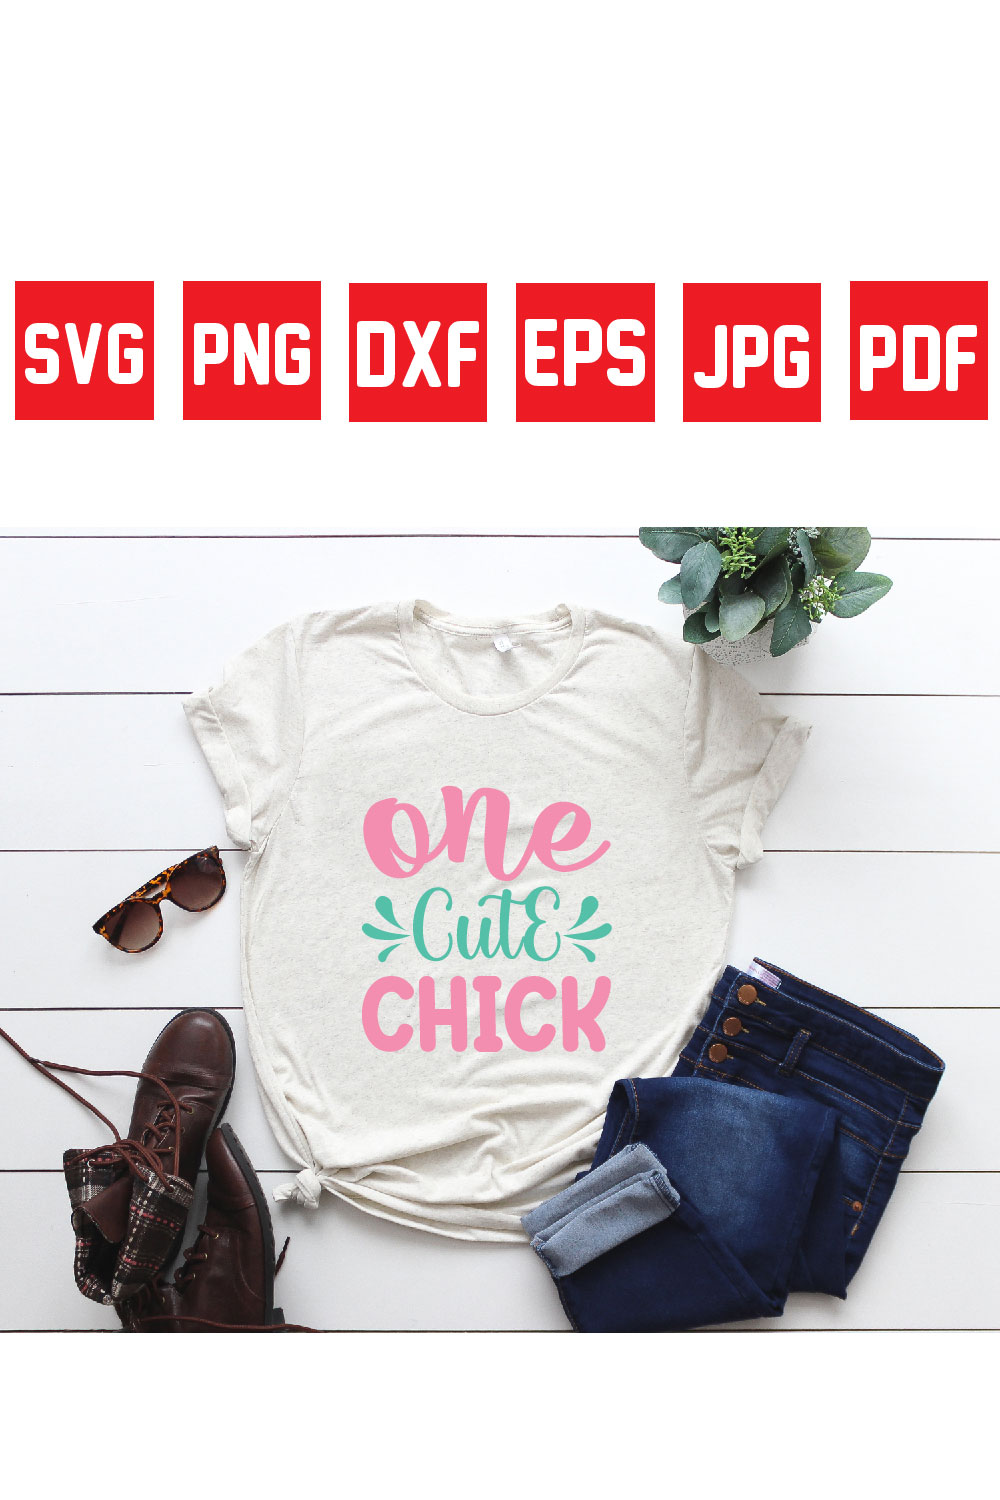 one cute chick pinterest preview image.